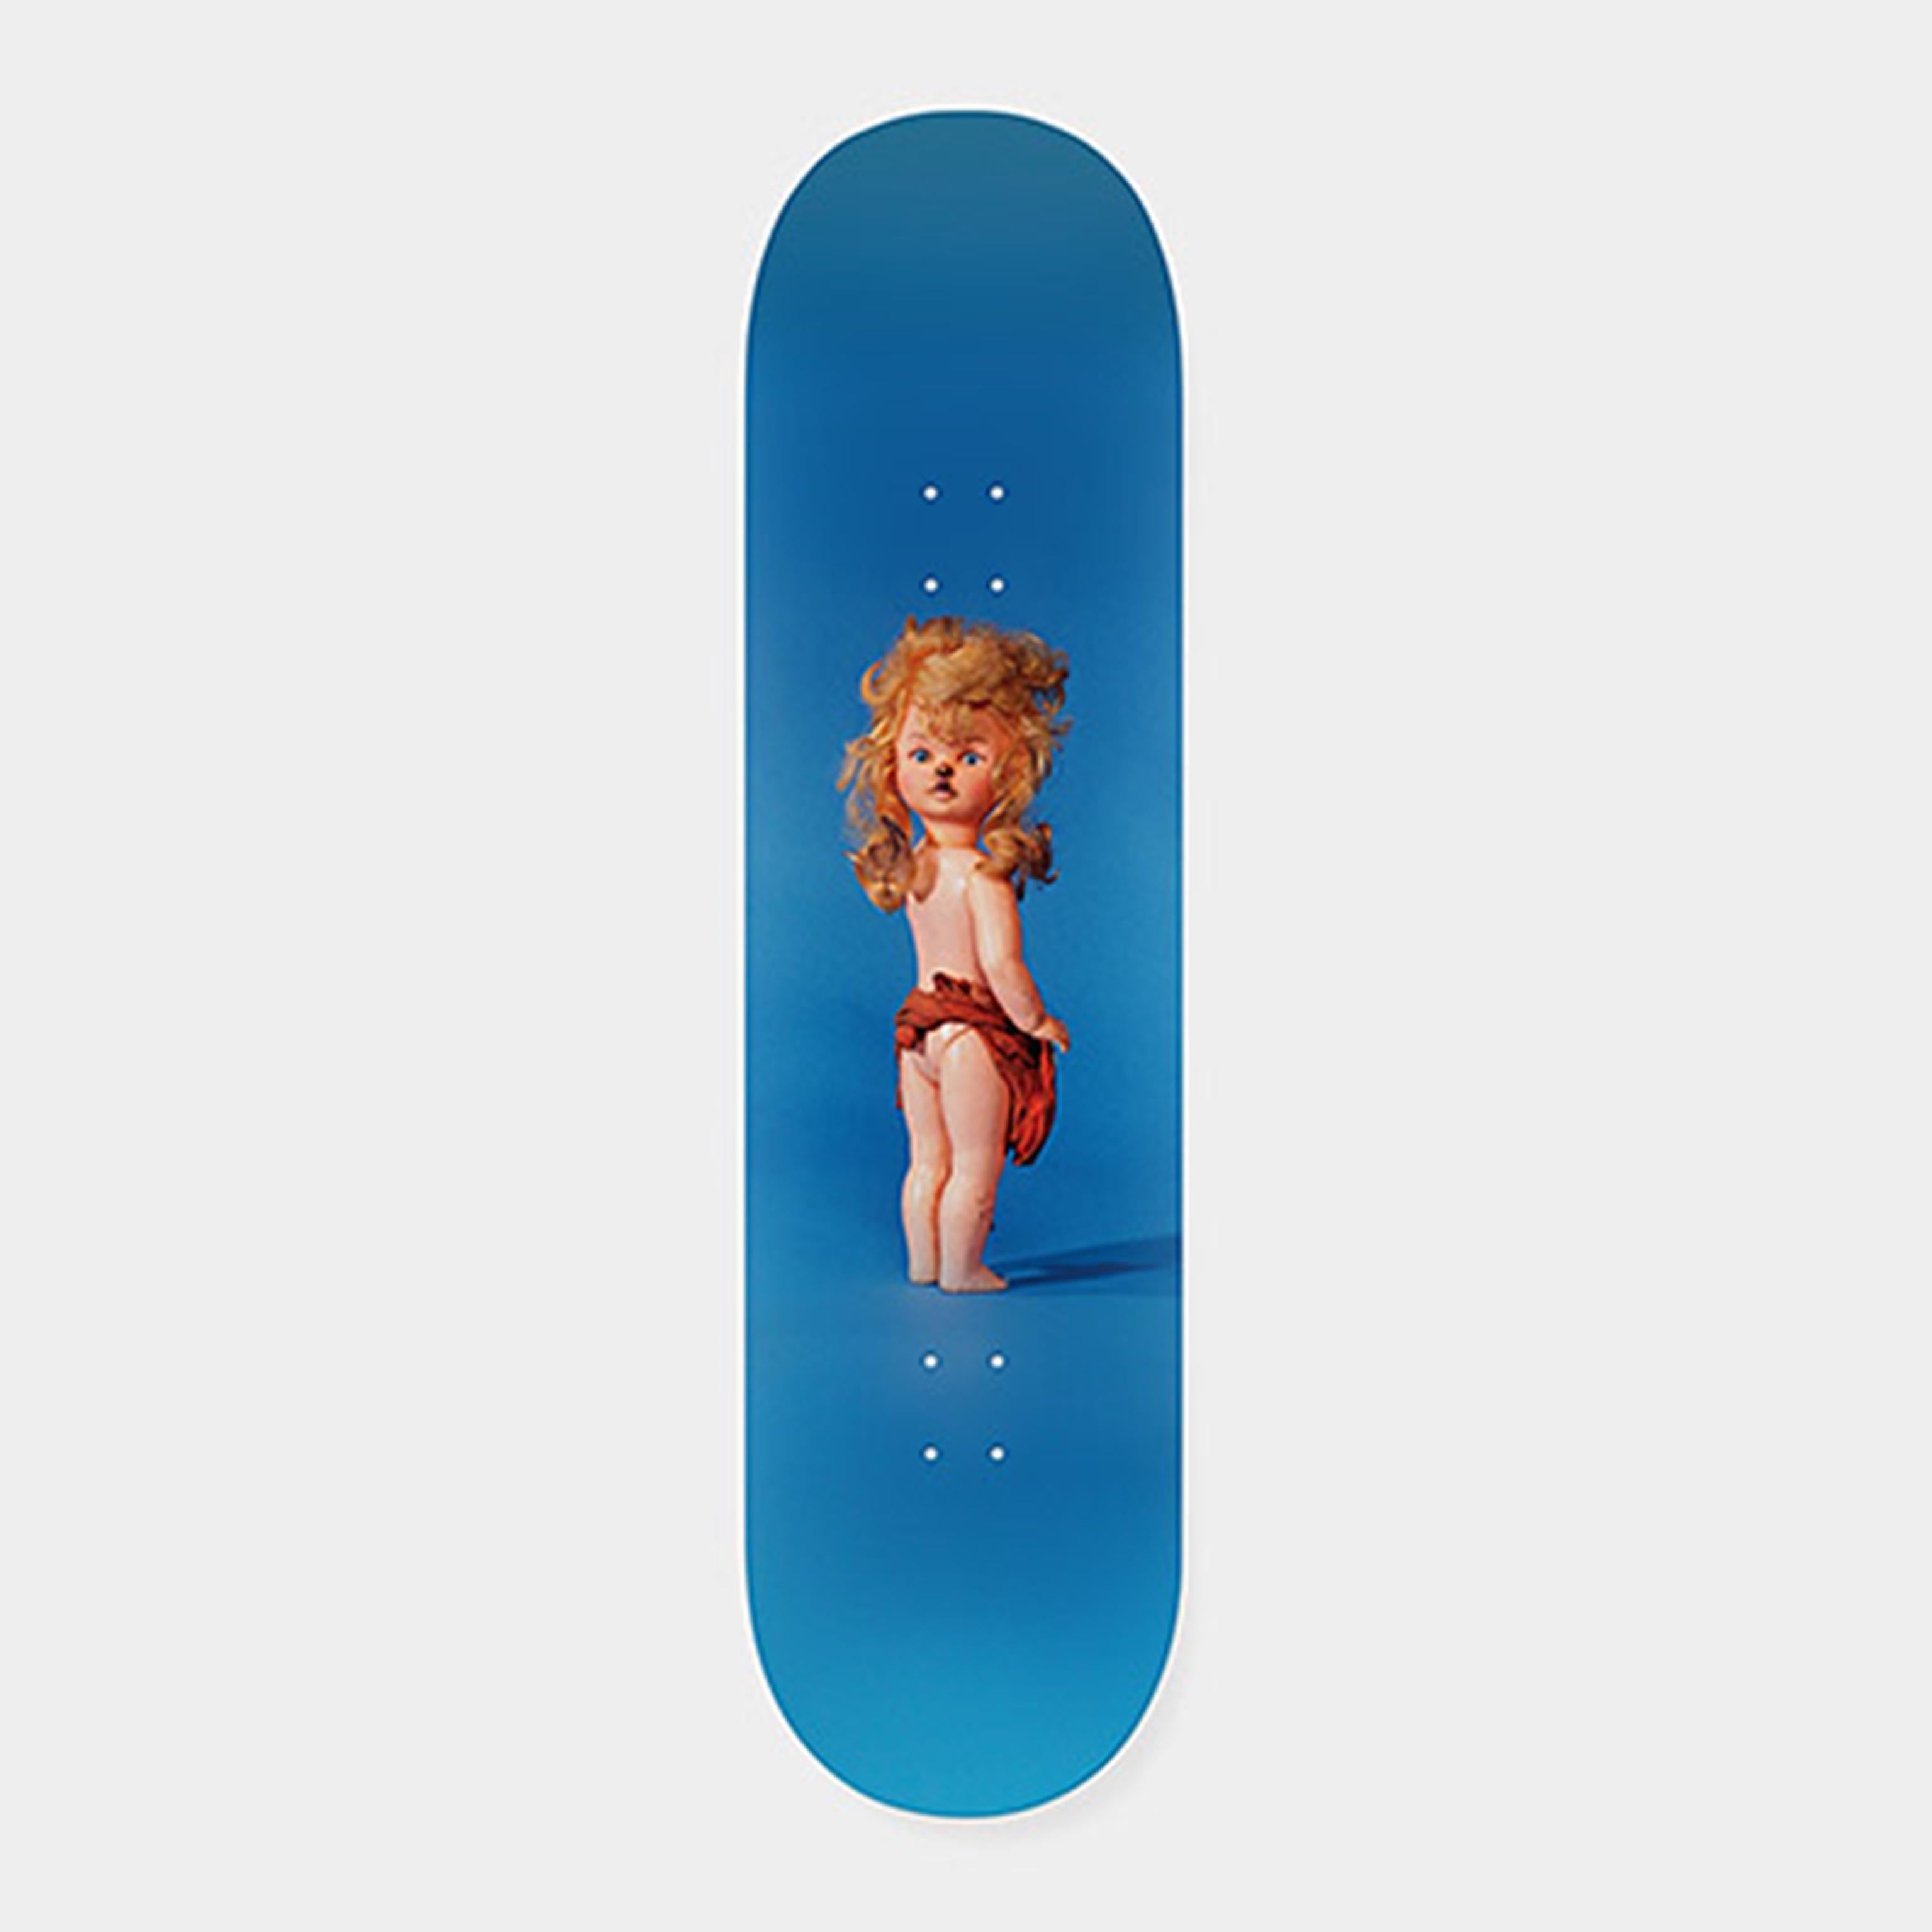 Doll, Limited Edition Skate Deck - Print by Paul McCarthy